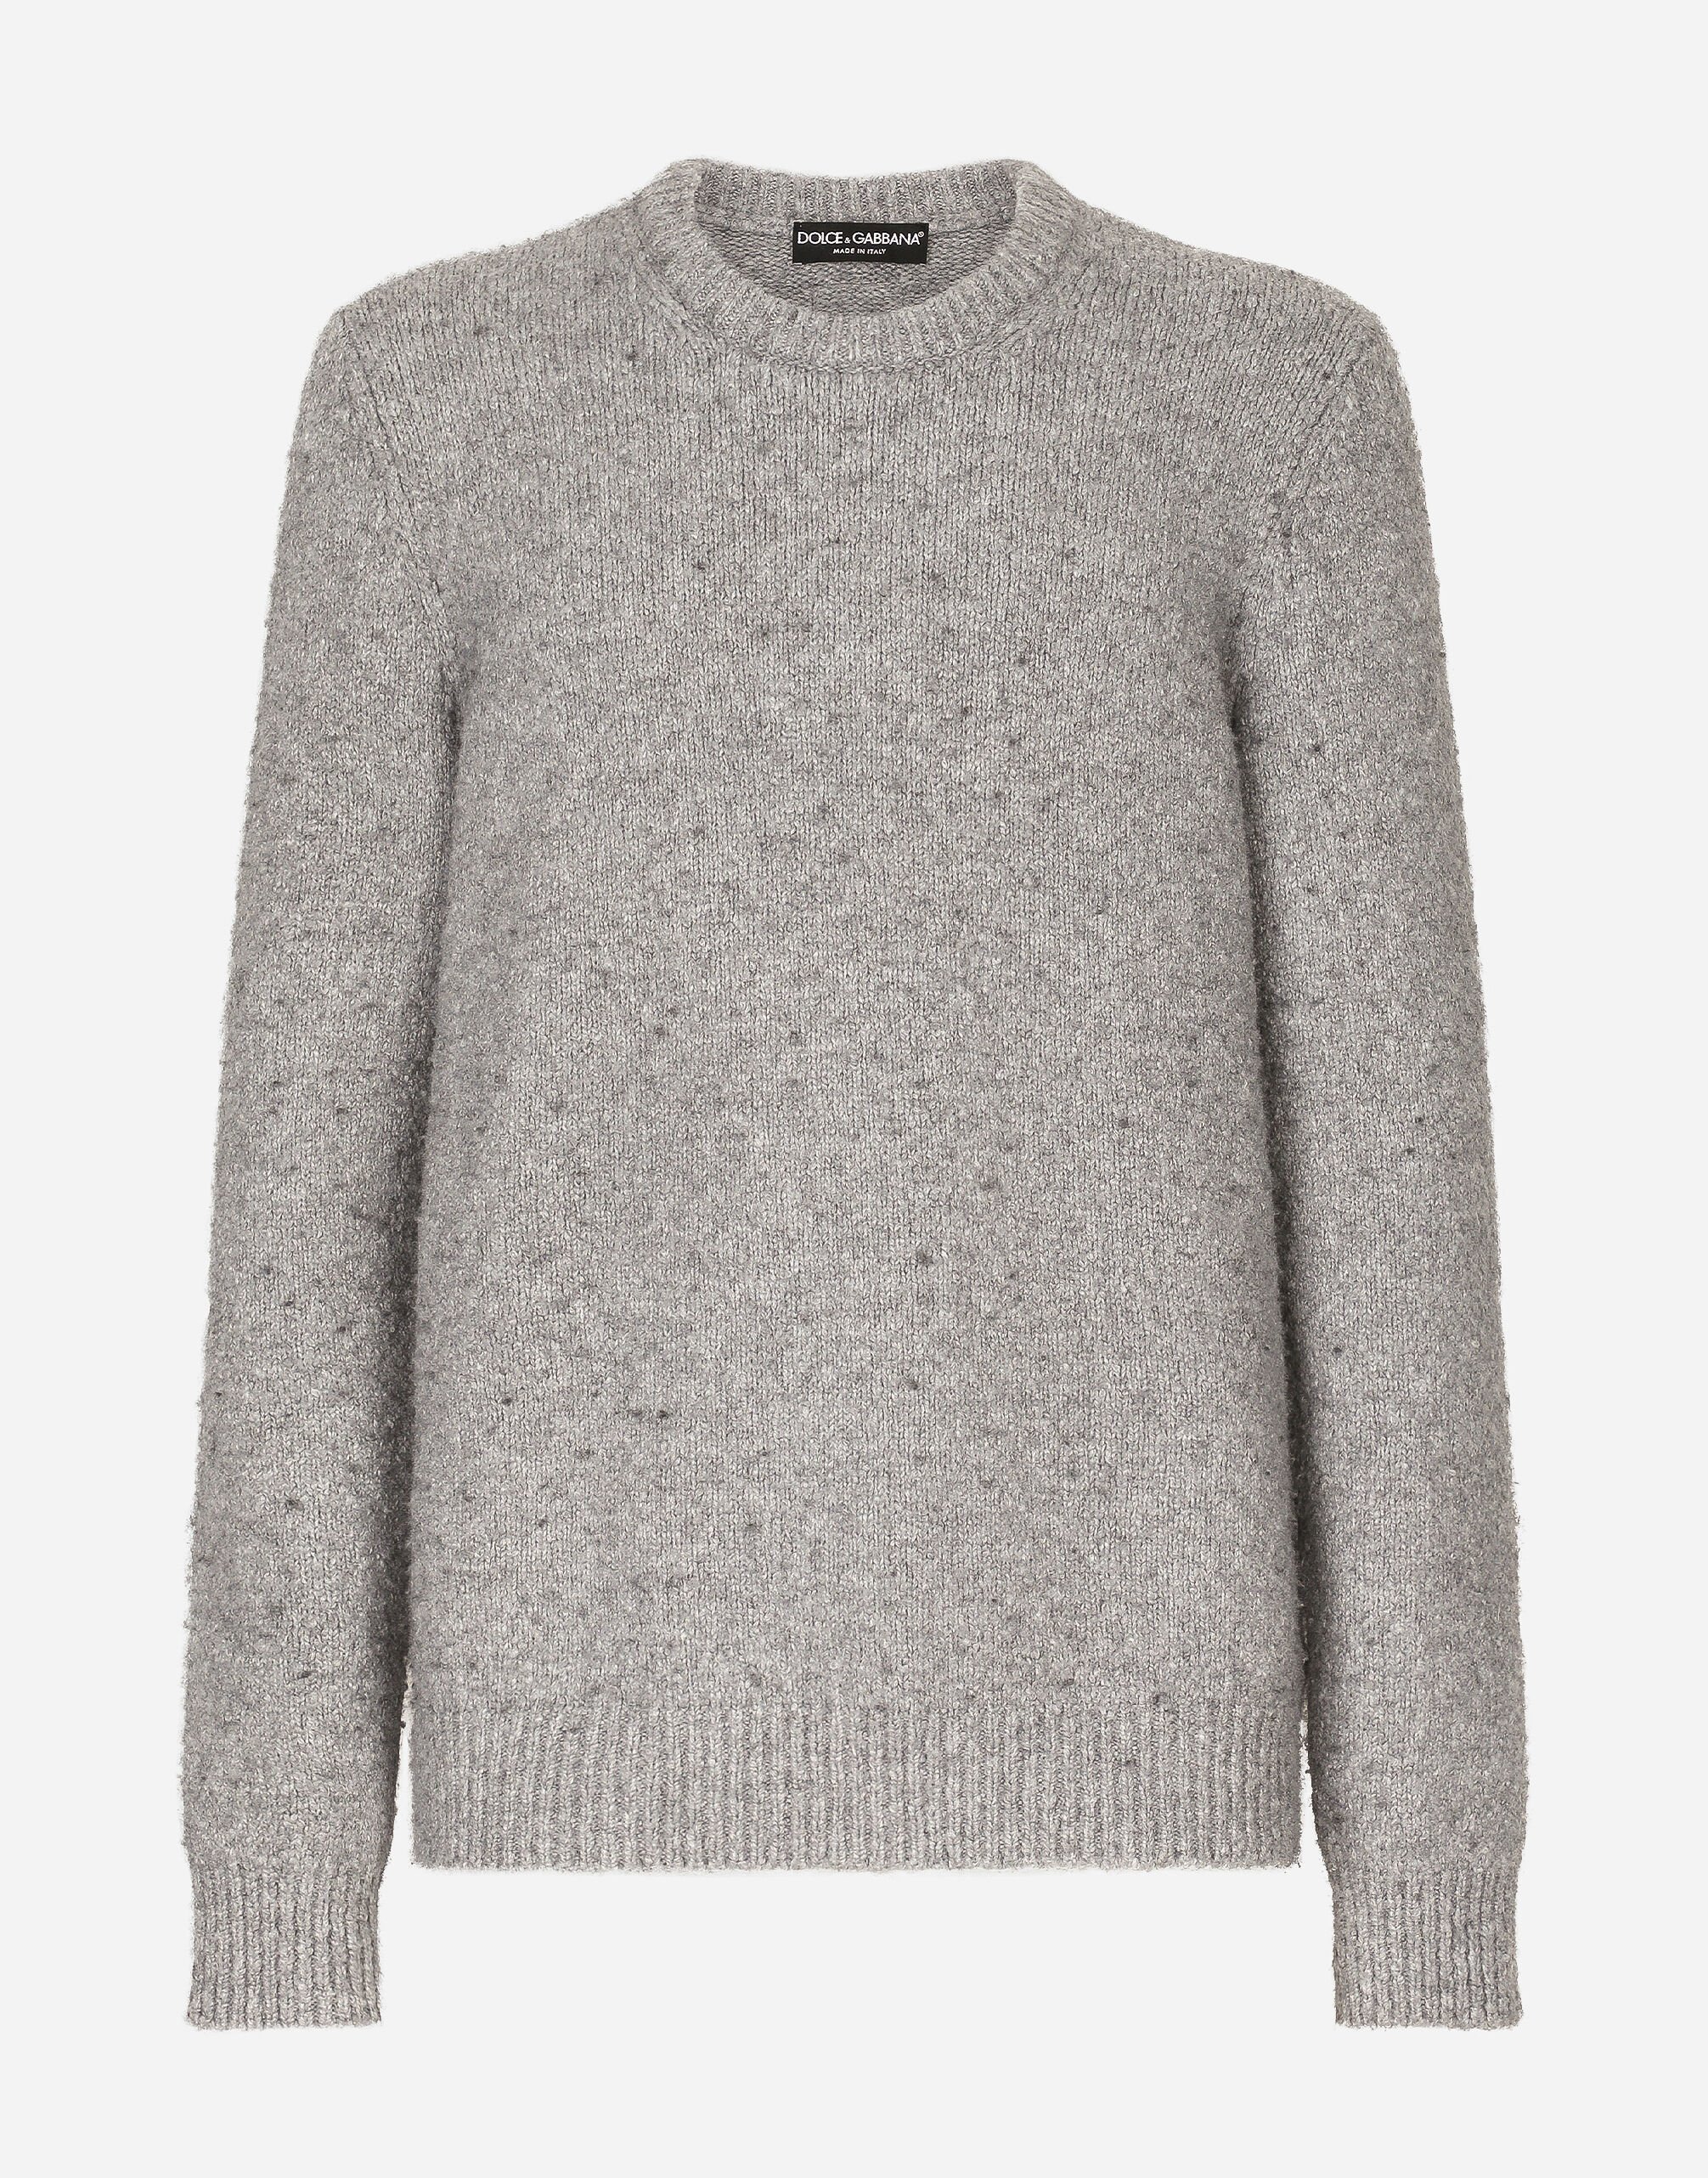 Dolce&Gabbana Technical wool round-neck sweater with logo tag Grey G041KTGG914